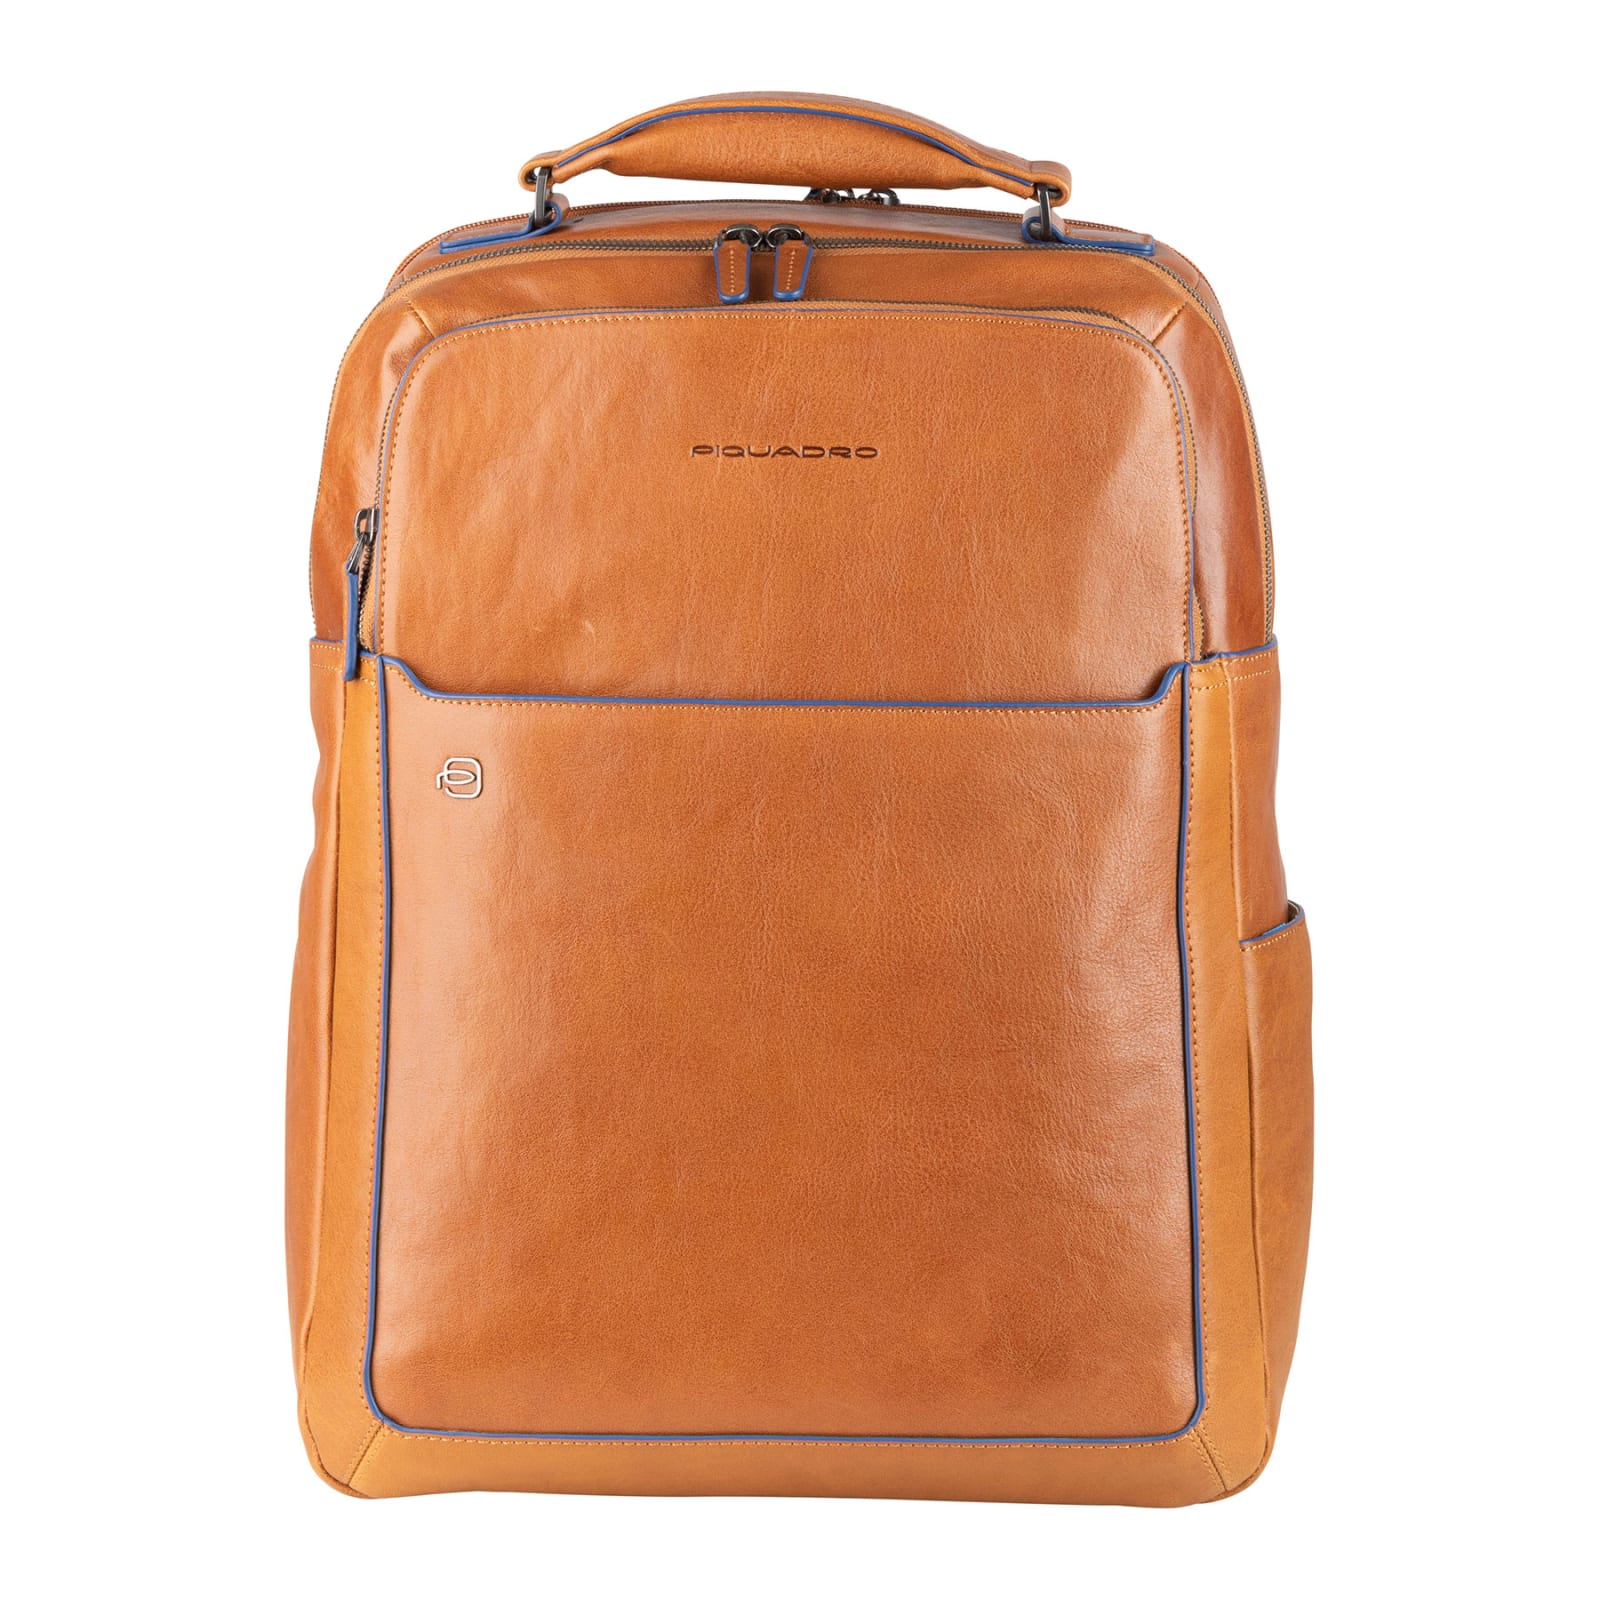 Piquadro Backpack In Cuoio